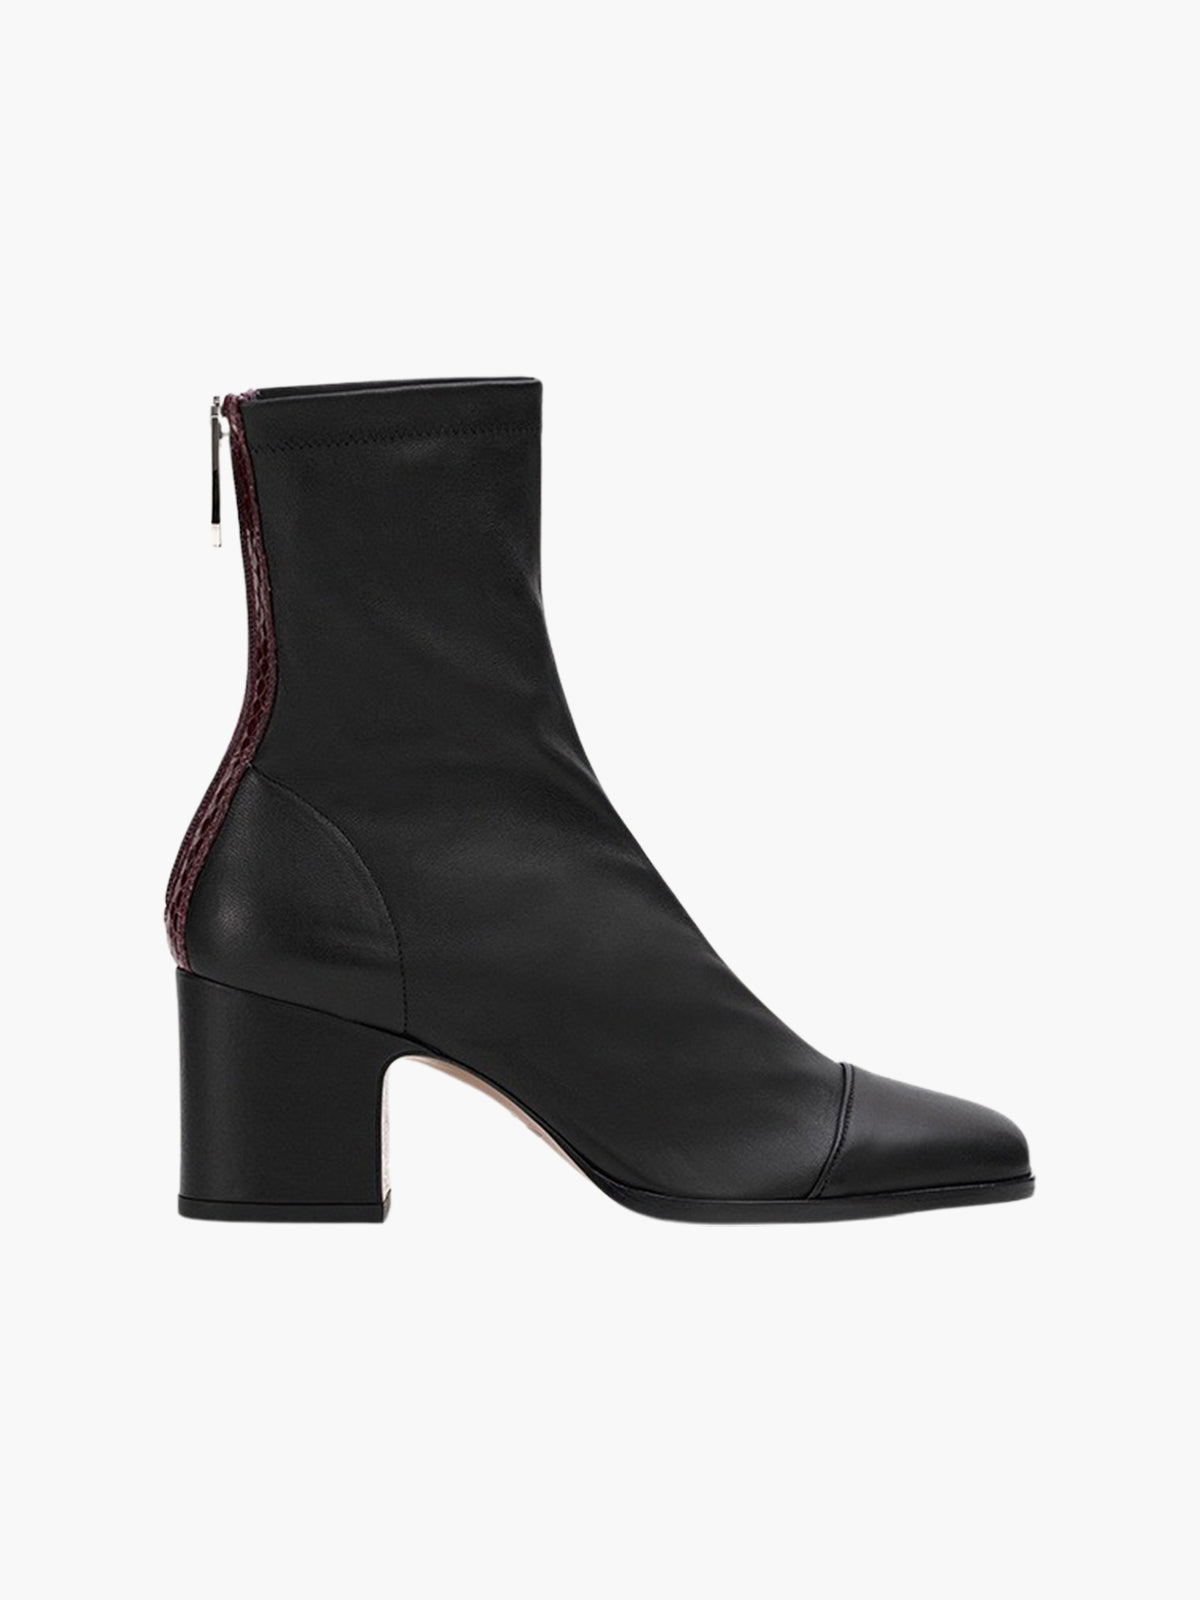 Aria Ankle Boots | Black Stretch Nappa